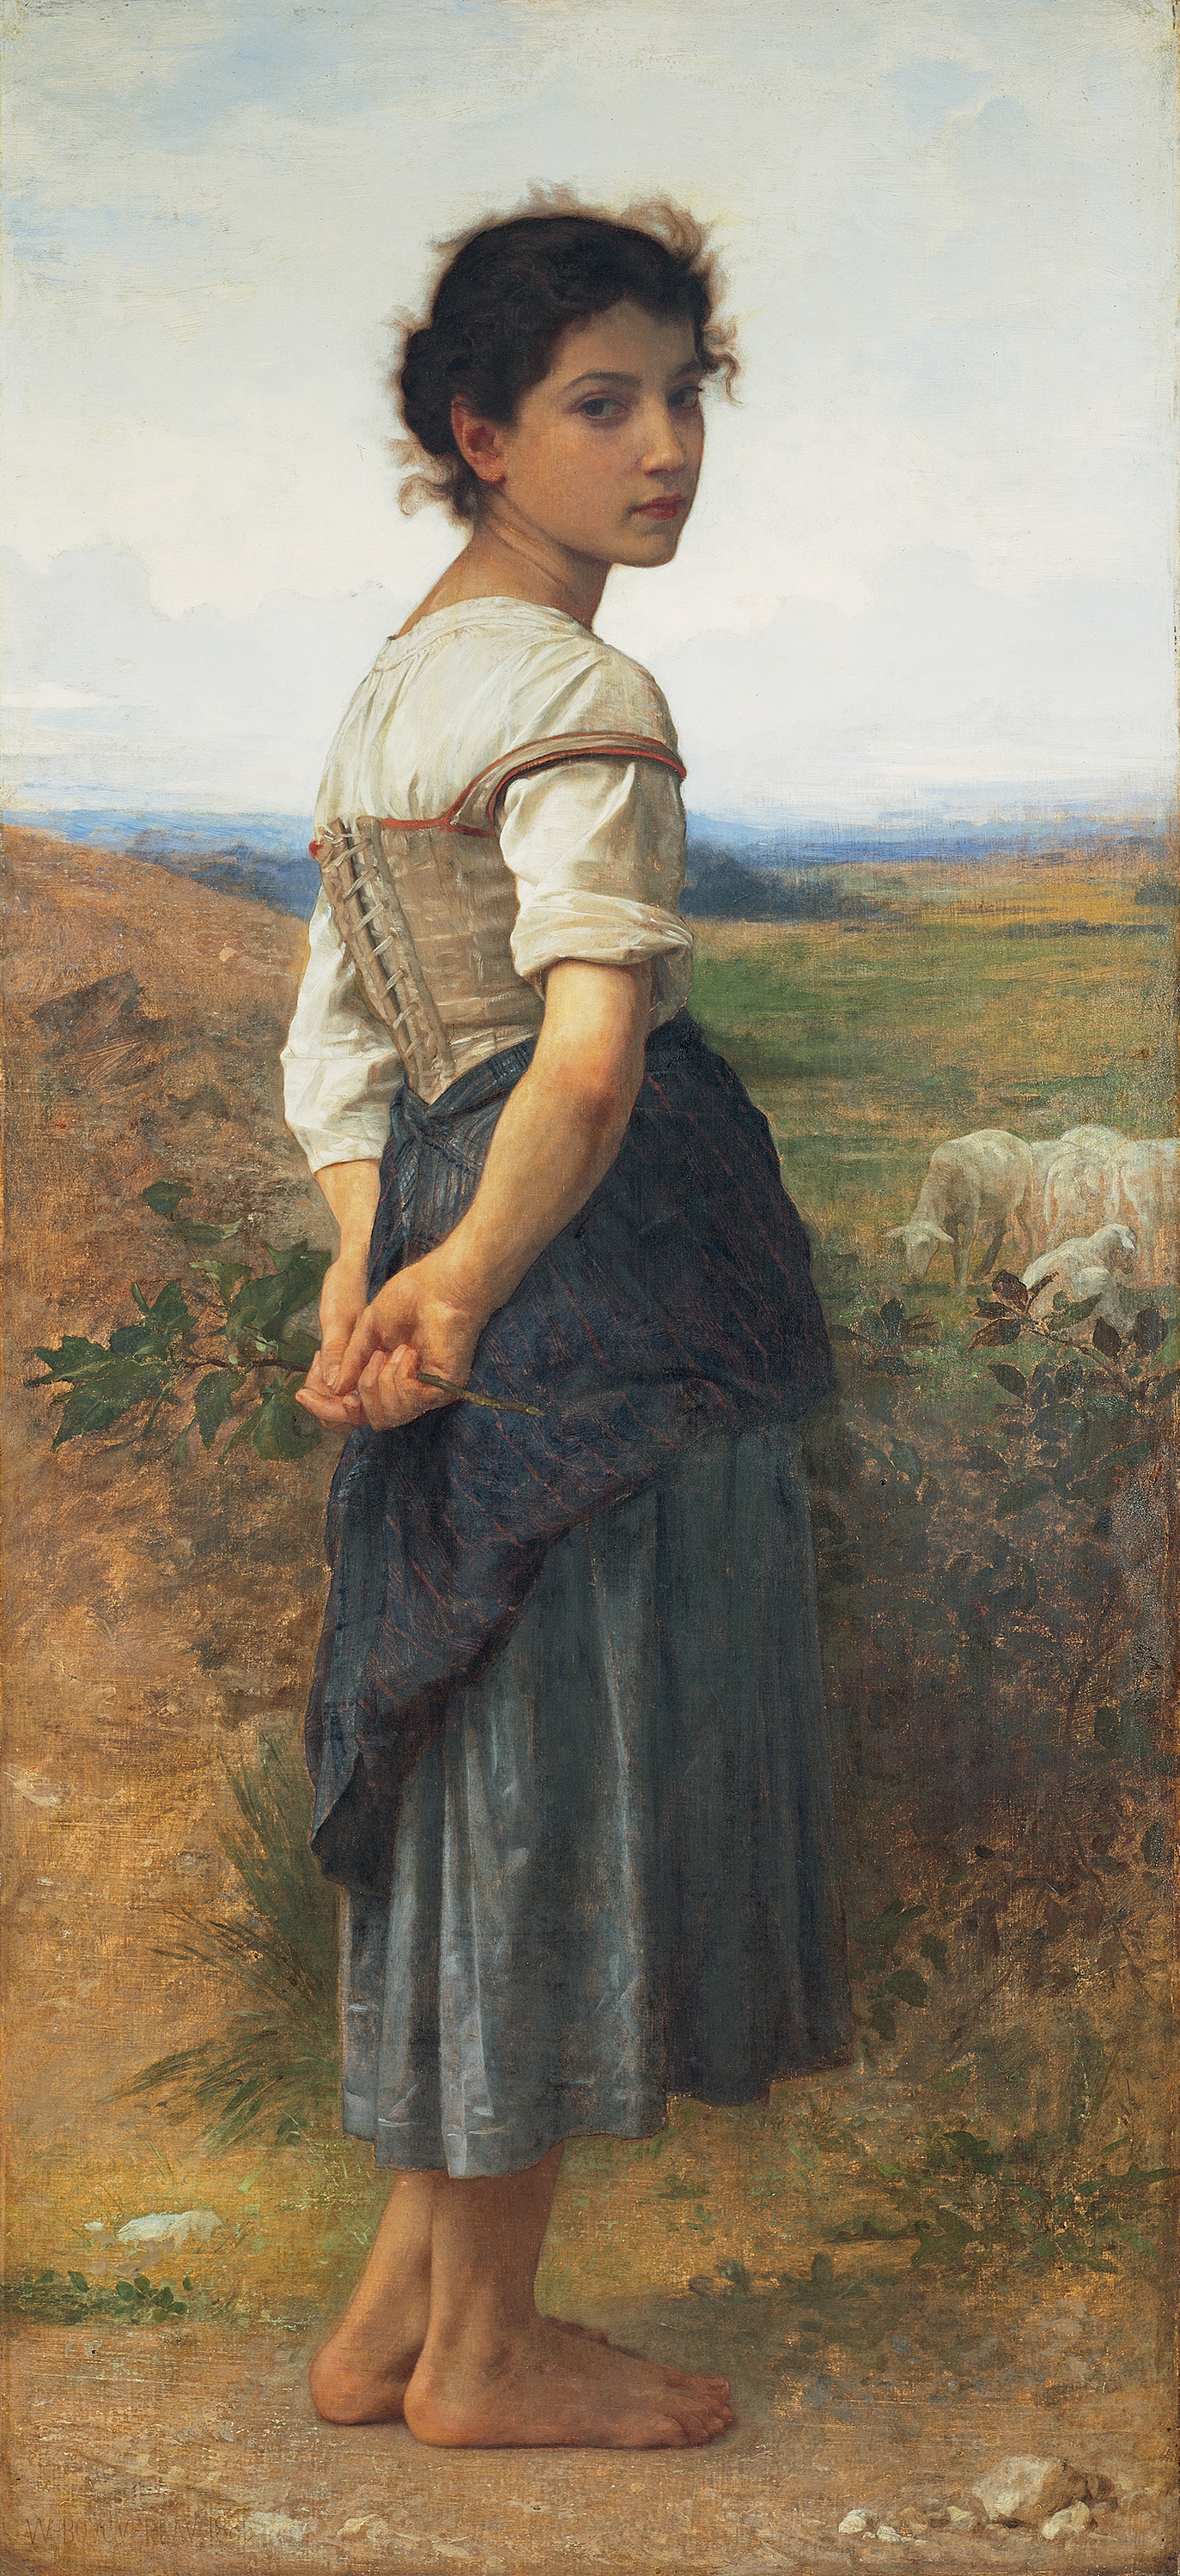 The Young Shepherdess by William-Adolphe Bouguereau - 1885 San Diego Museum of Art